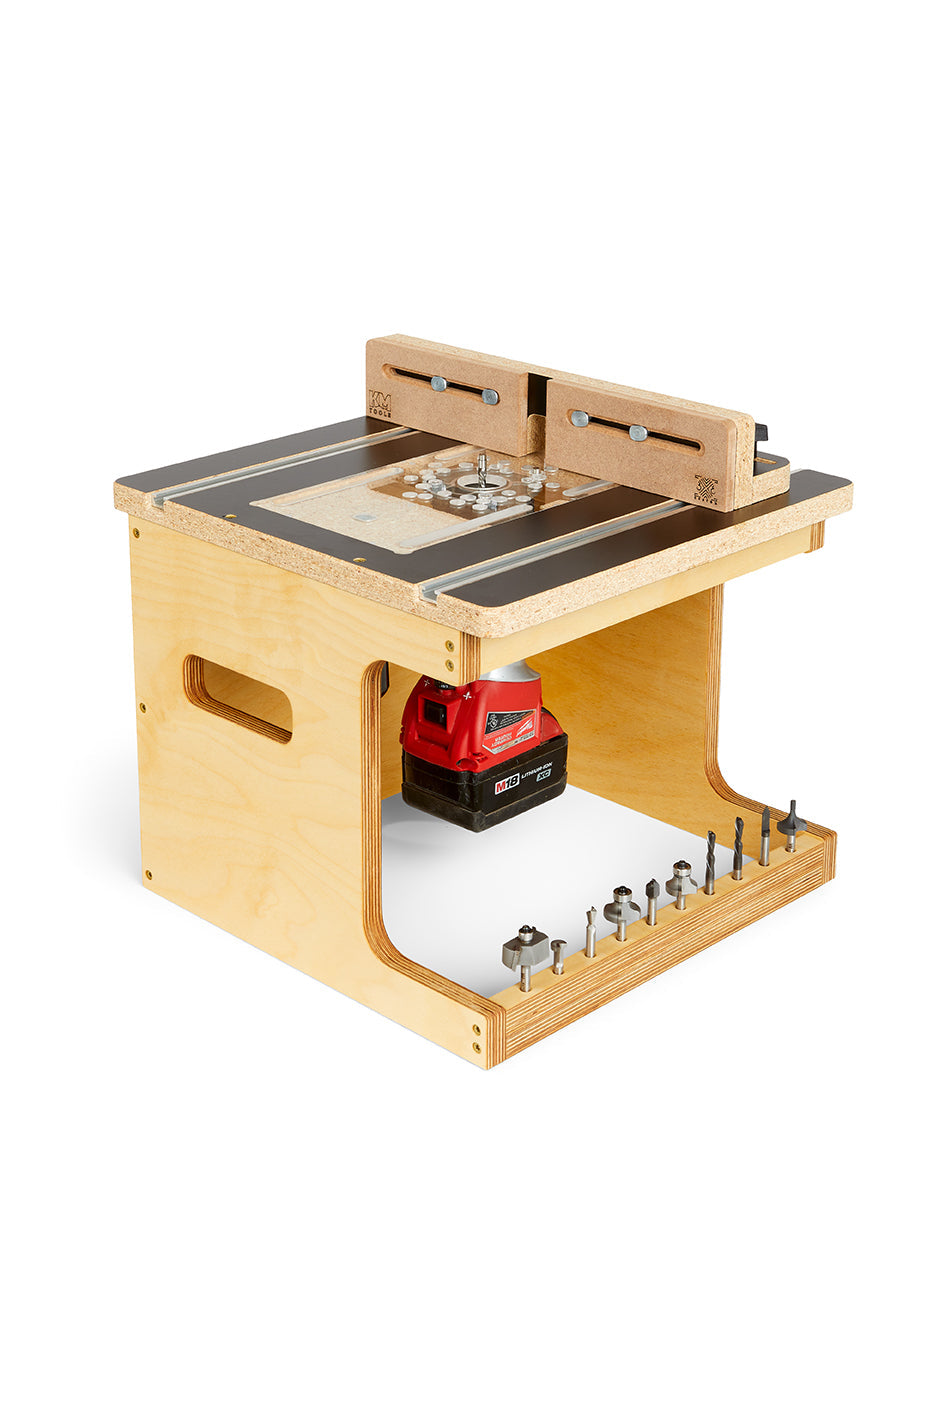 Using a Pin Router? - Woodworking, Blog, Videos, Plans